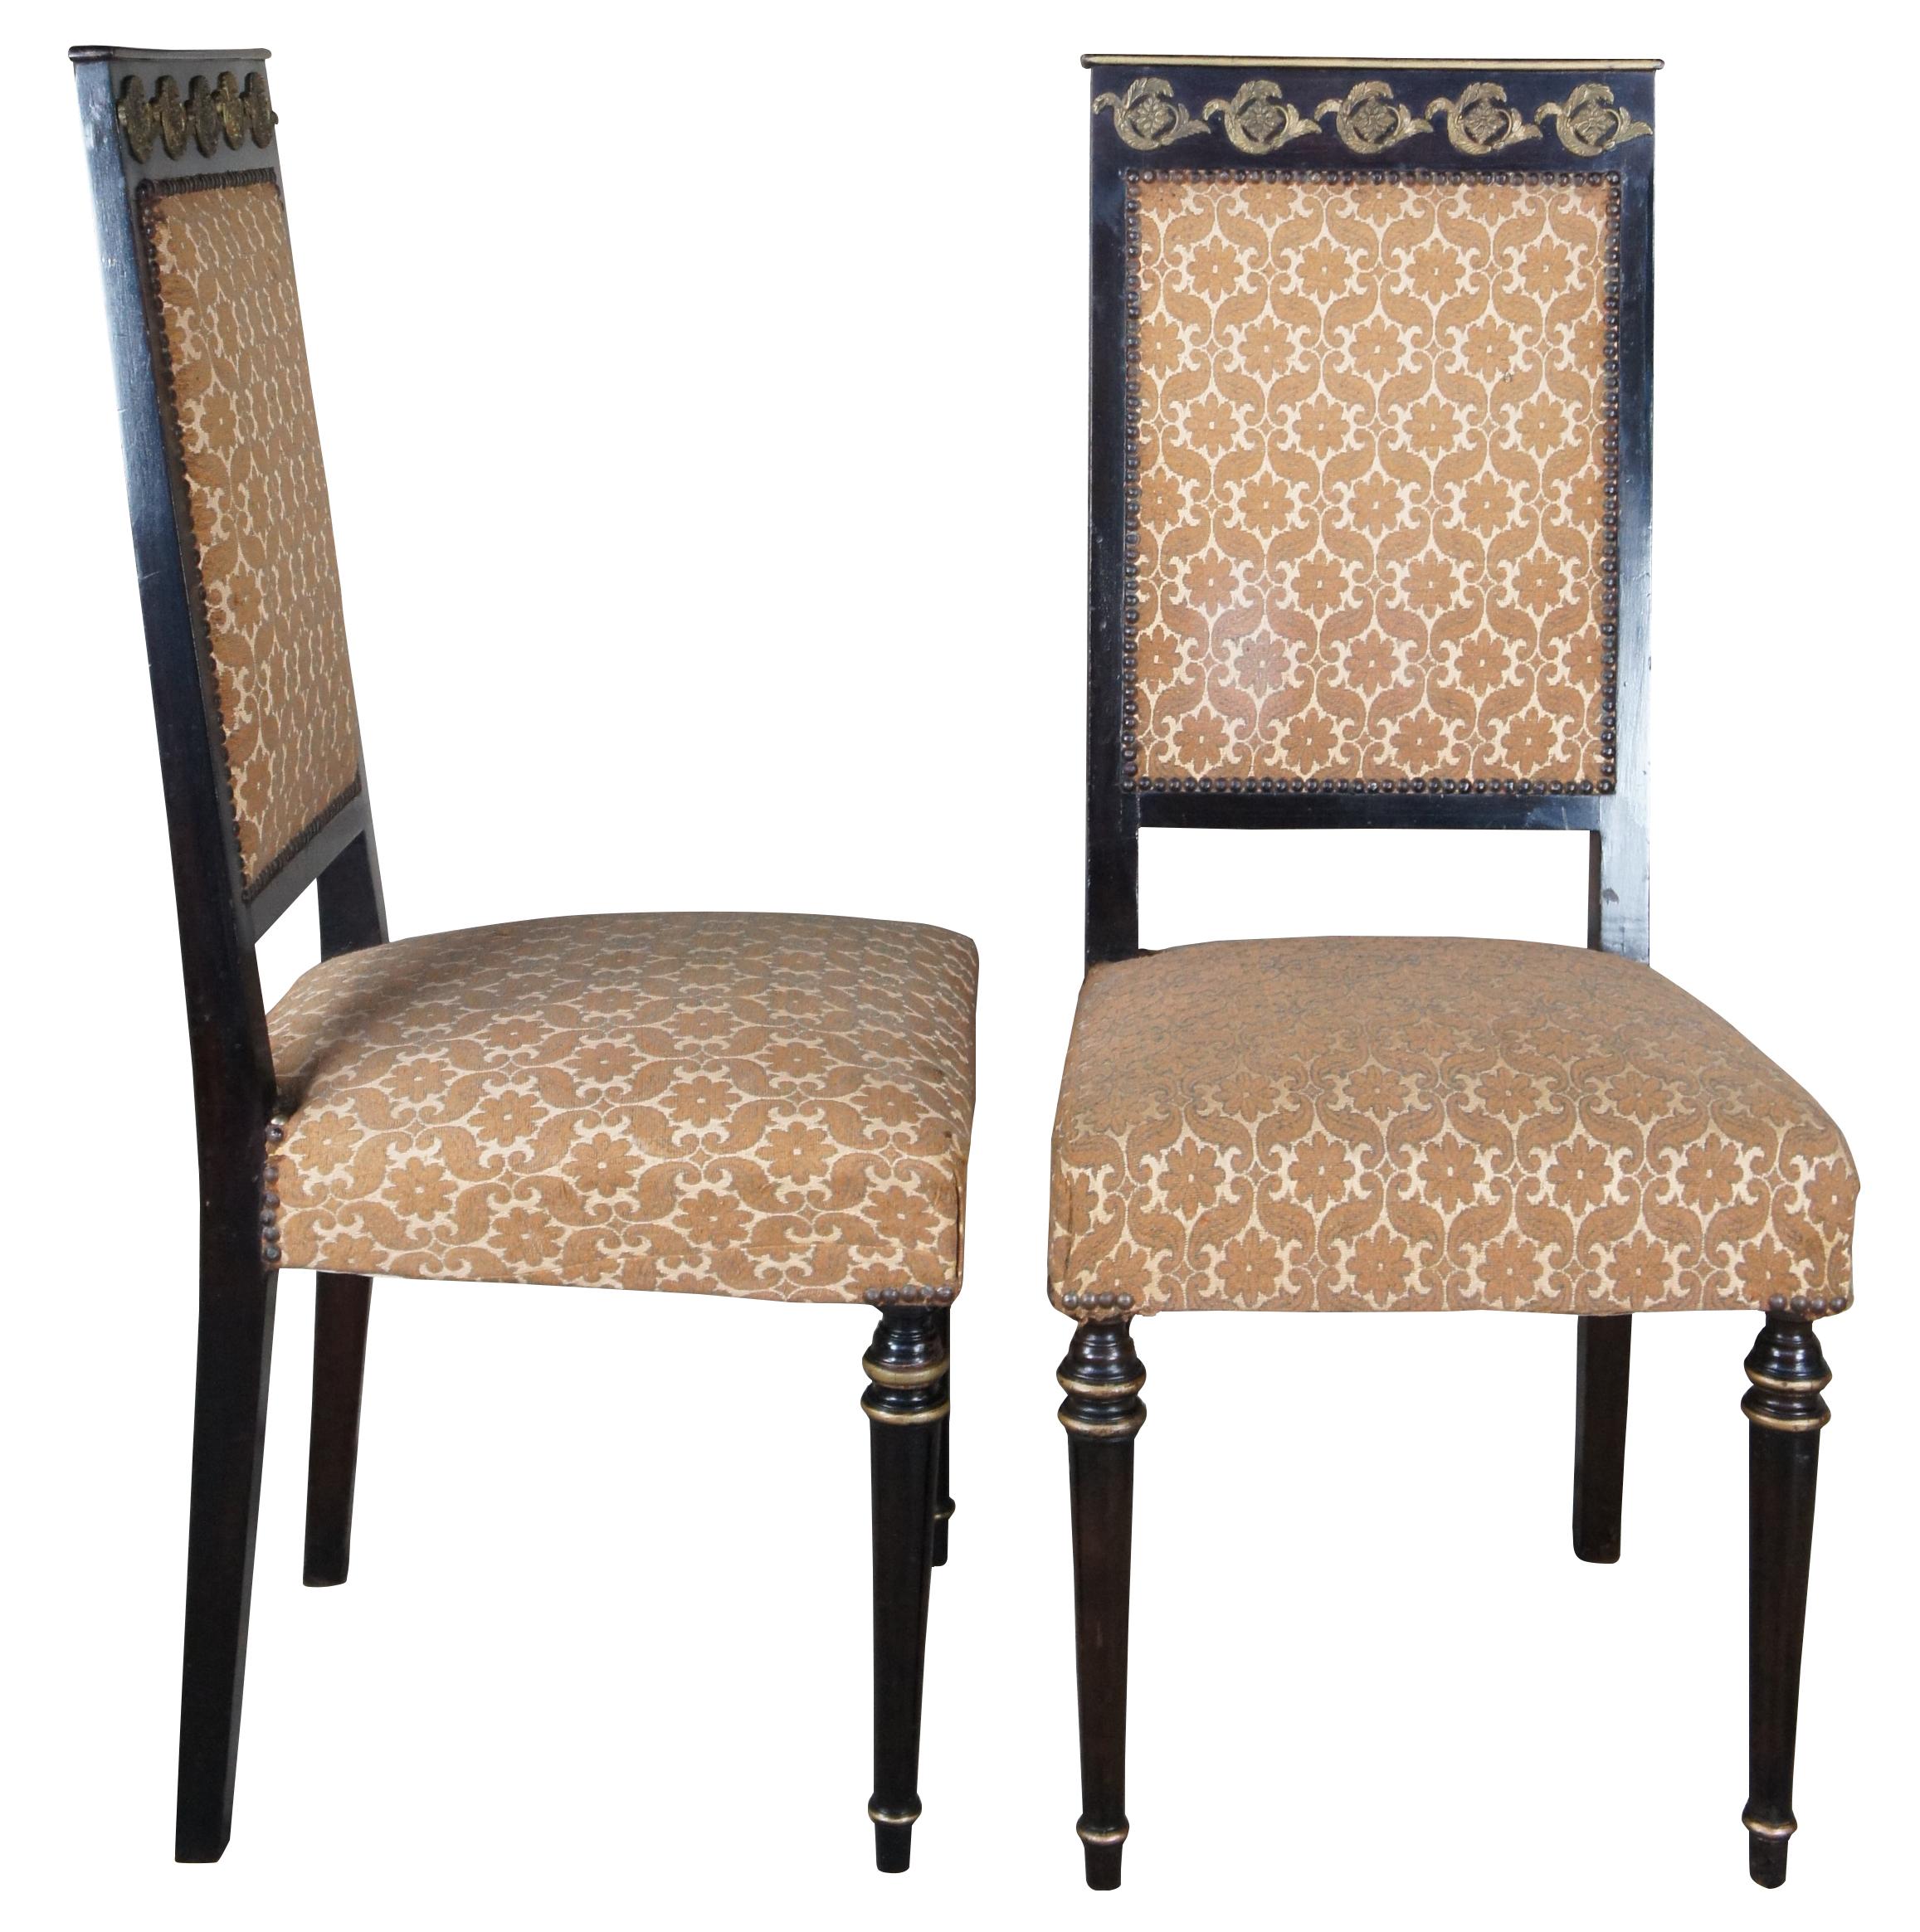 Vintage set of six French Louis XVI inspired dining chairs. Made in Cairo Egypt (Arabska Republika Egiptu) by Abbas, circa 1972. Made of ebonized wood featuring ornate brass medallions with floral upholstery, nailhead trim, and gold banding.
 